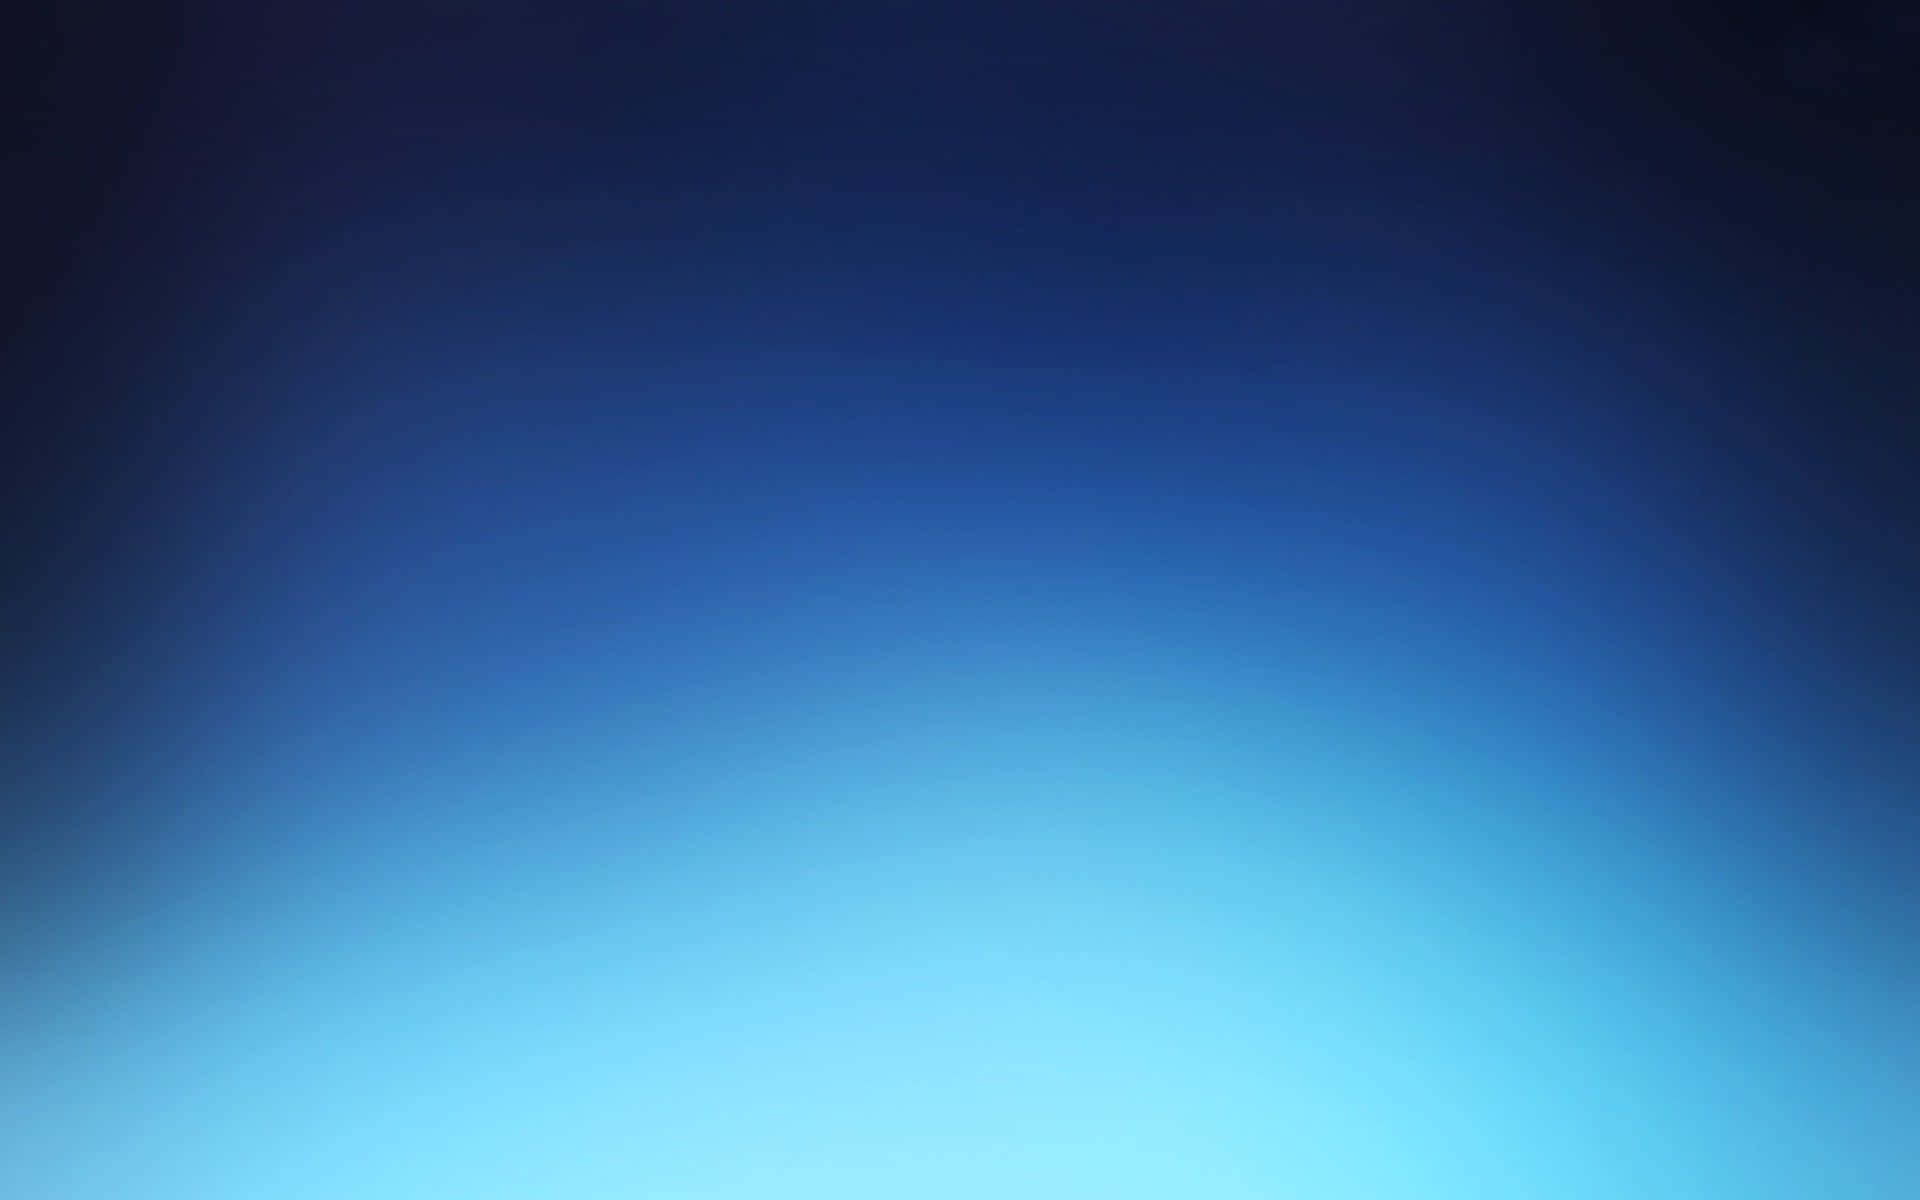 Fancy Shades Of Blue Gradient Background